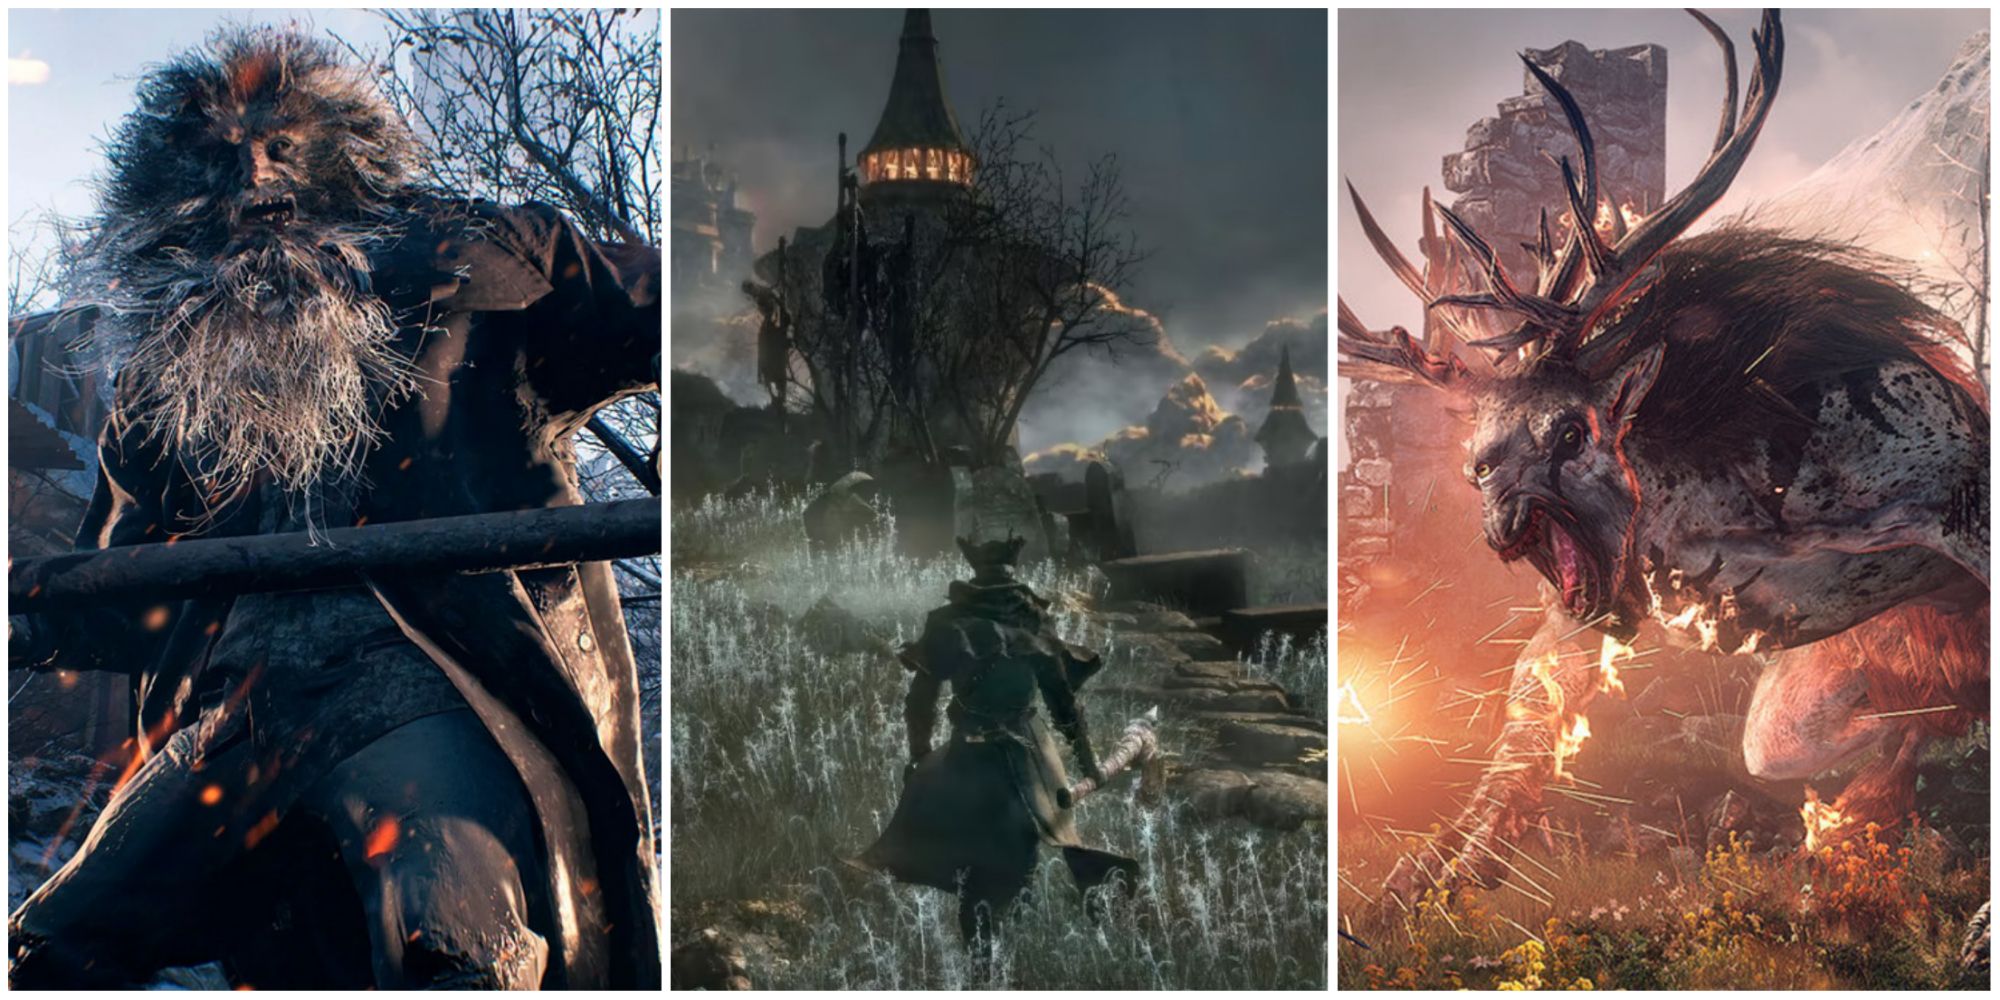 Resident Evil Village, Bloodborne, And The Witcher 3